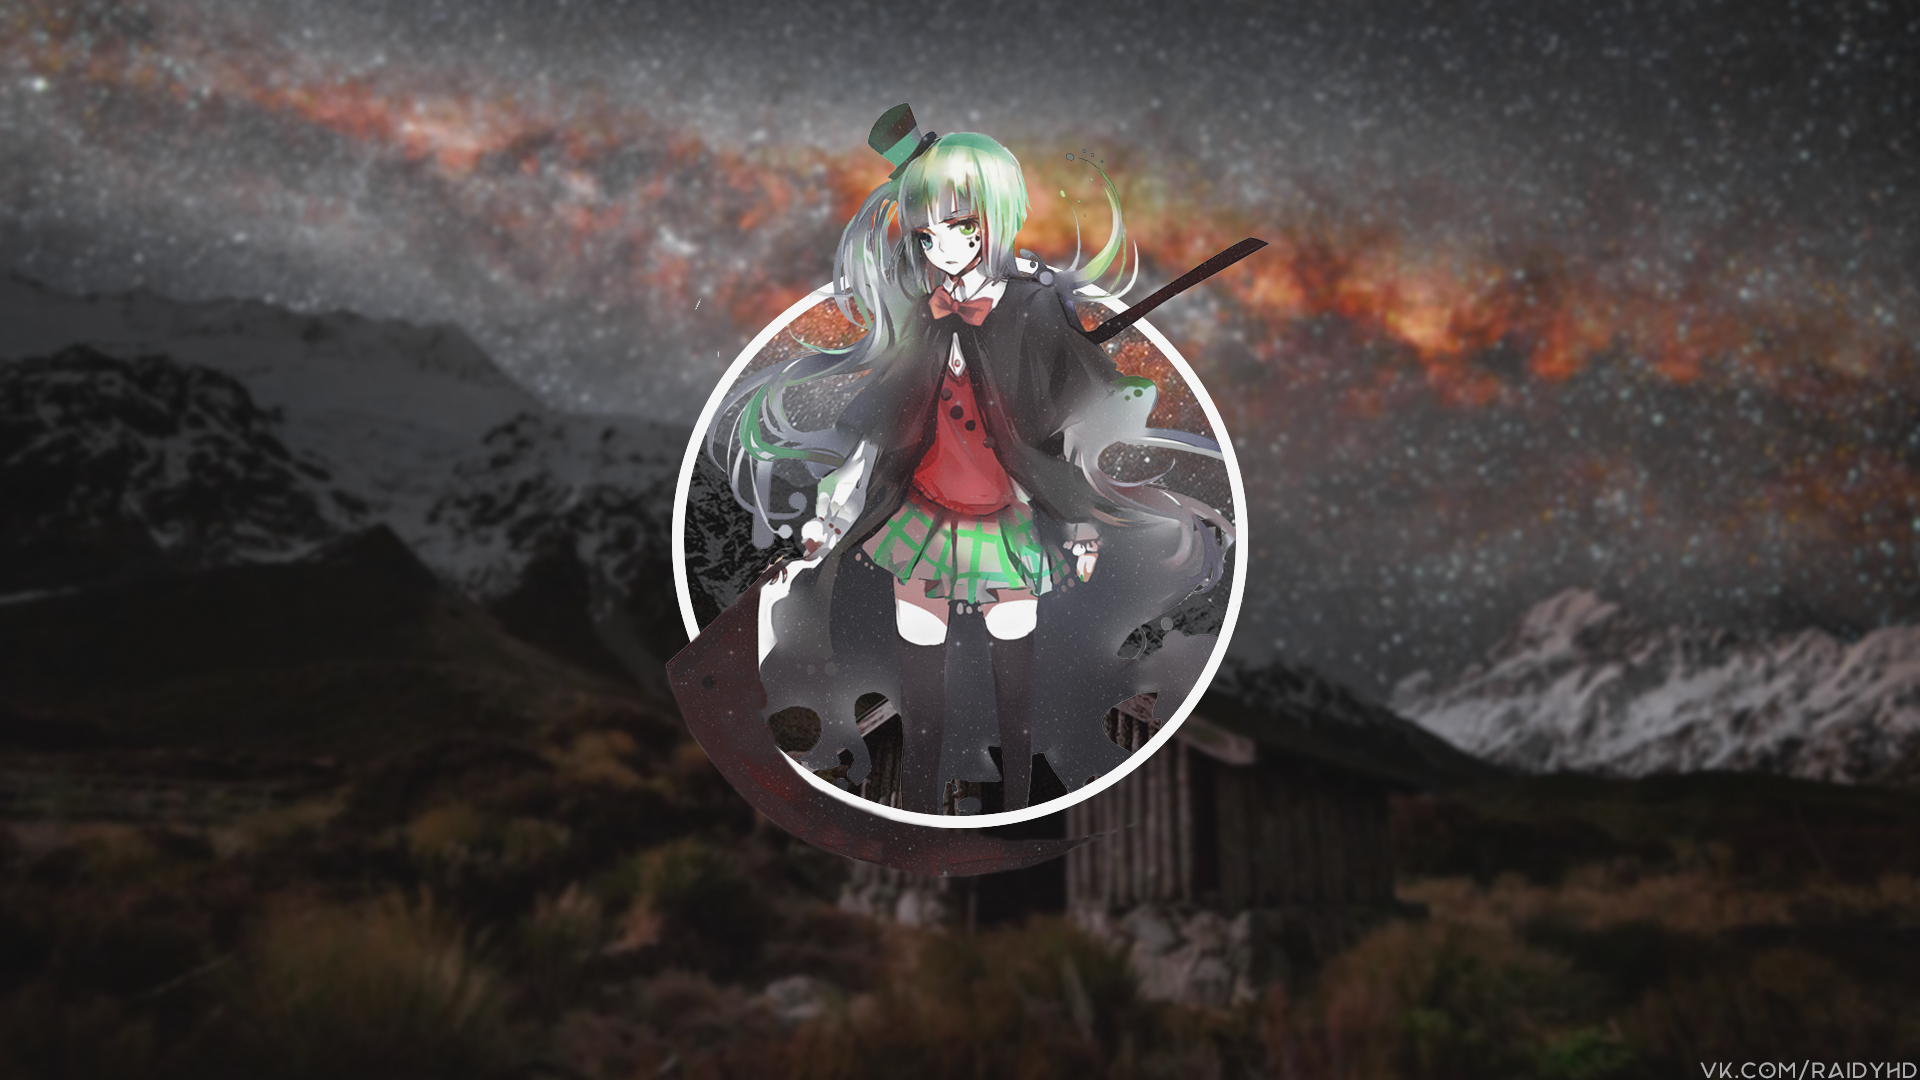 Anime 1920x1080 anime anime girls picture-in-picture hat funny hats women with hats landscape New Zealand green hair long hair green eyes mountains nature stockings